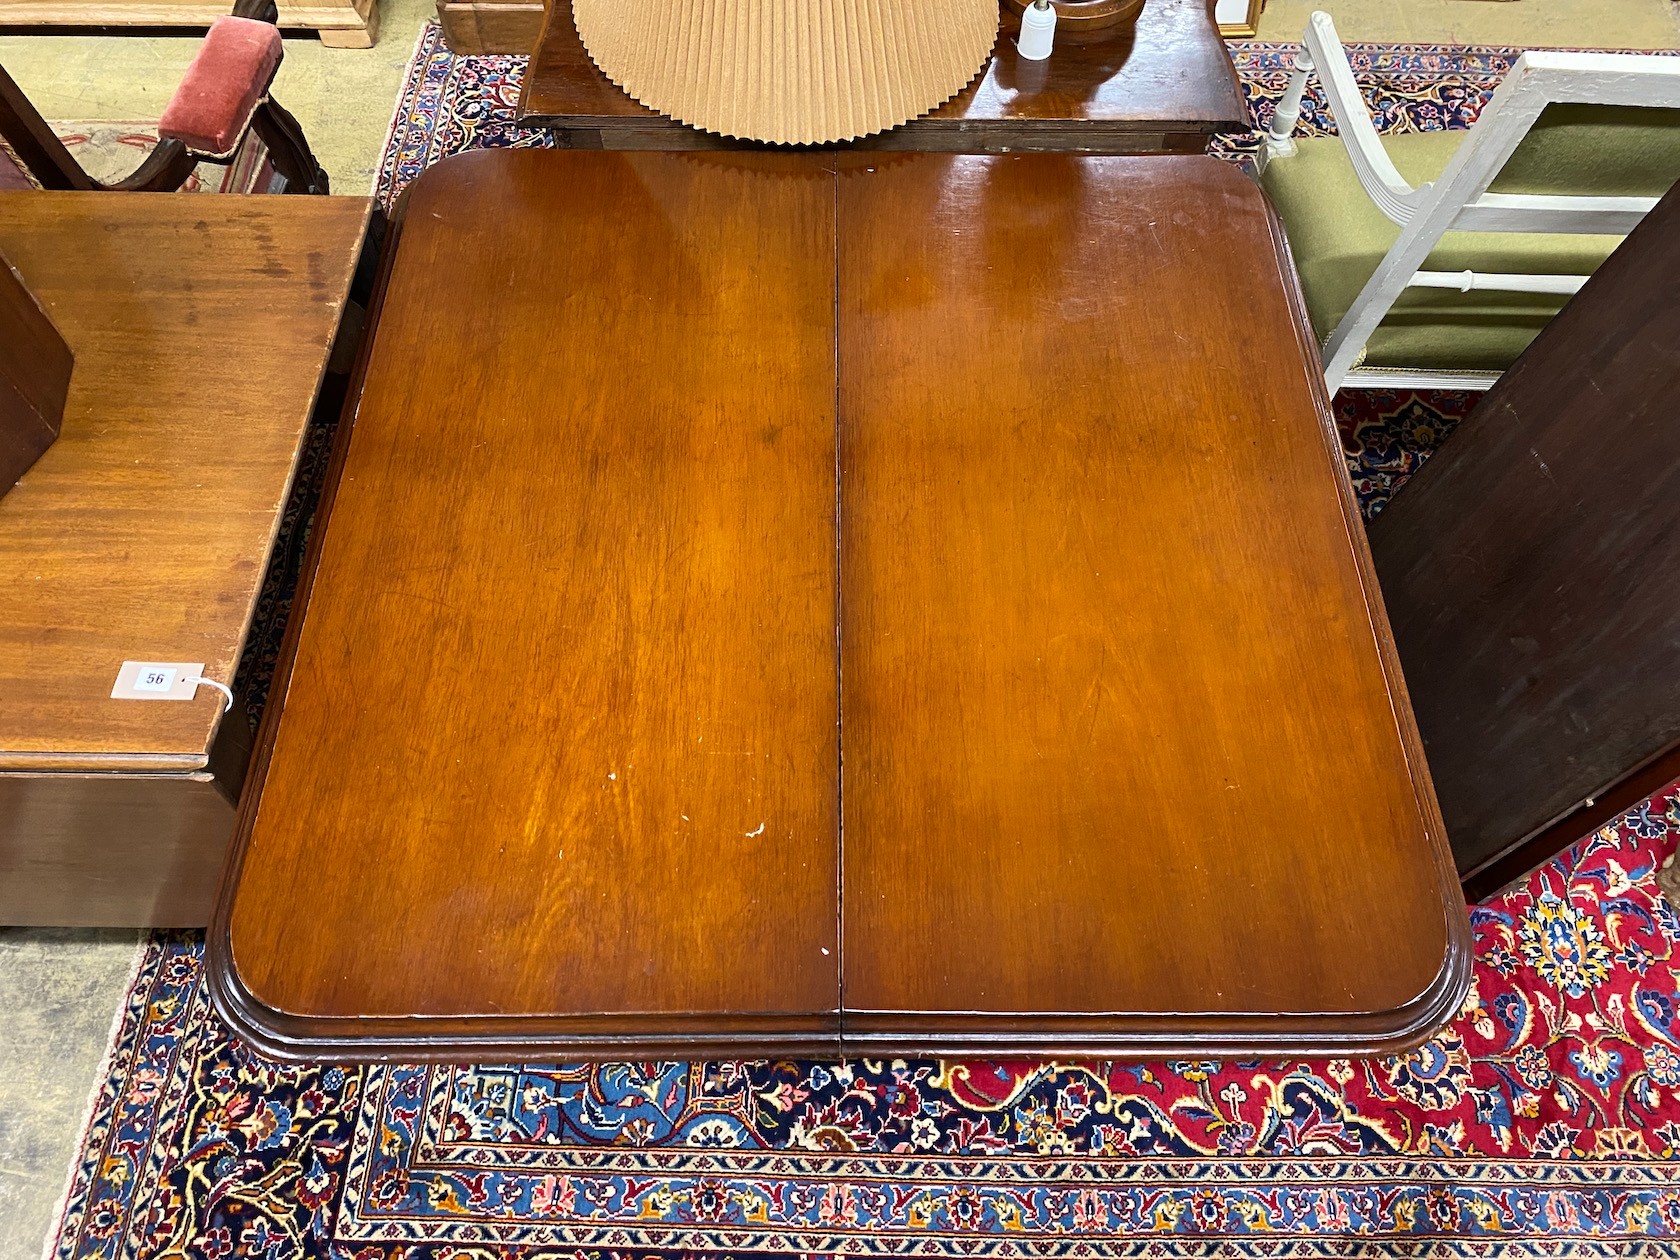 A Victorian mahogany extending dining table, length 192cm extended, width 101cm, height 74cm